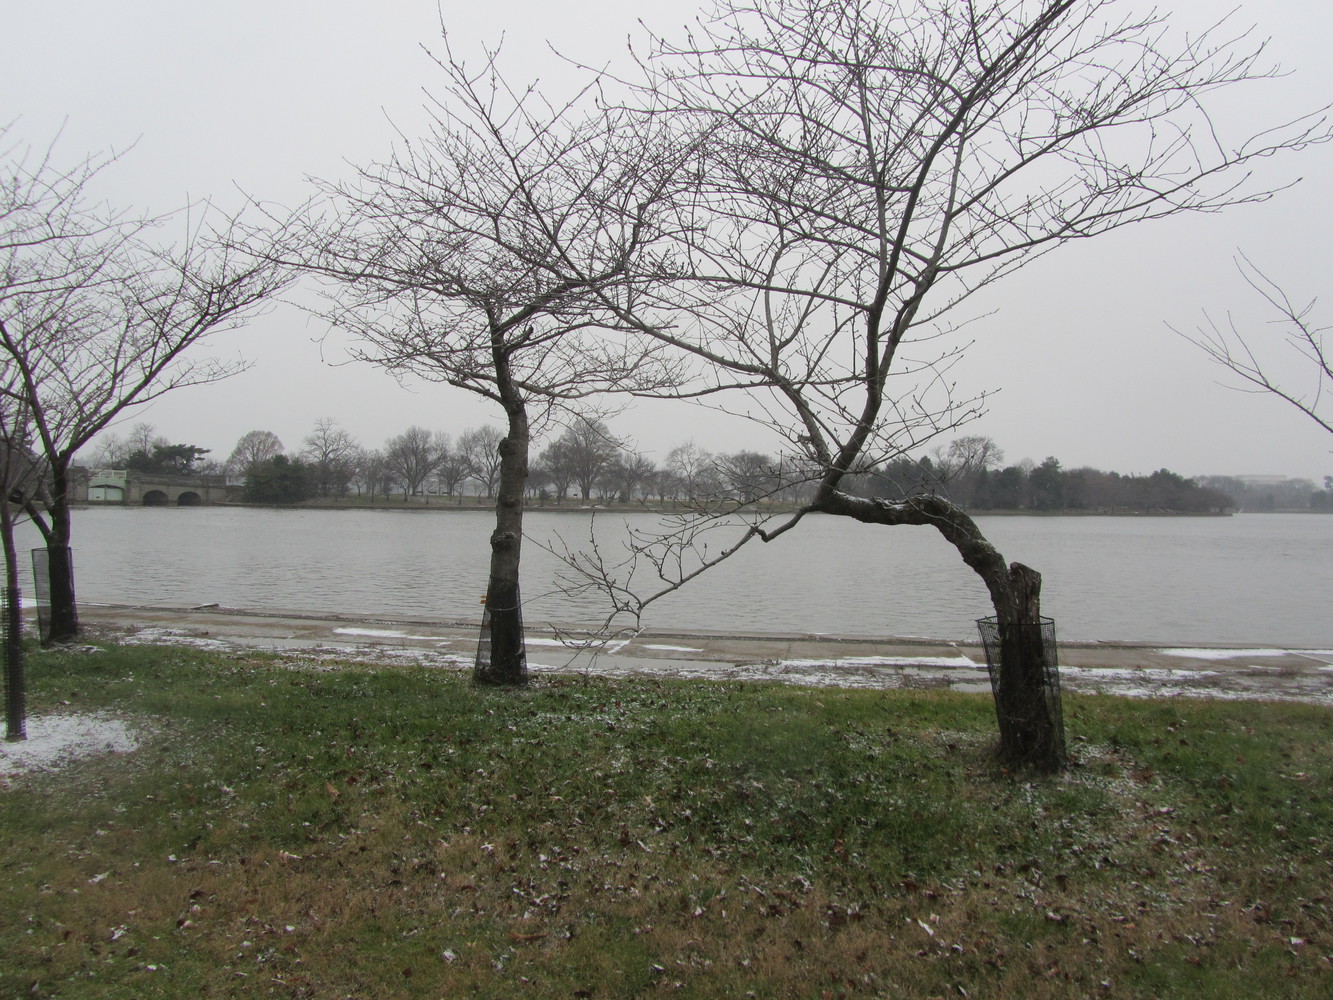 Trees without leaves near a man-made reservoir named Tidal Basin